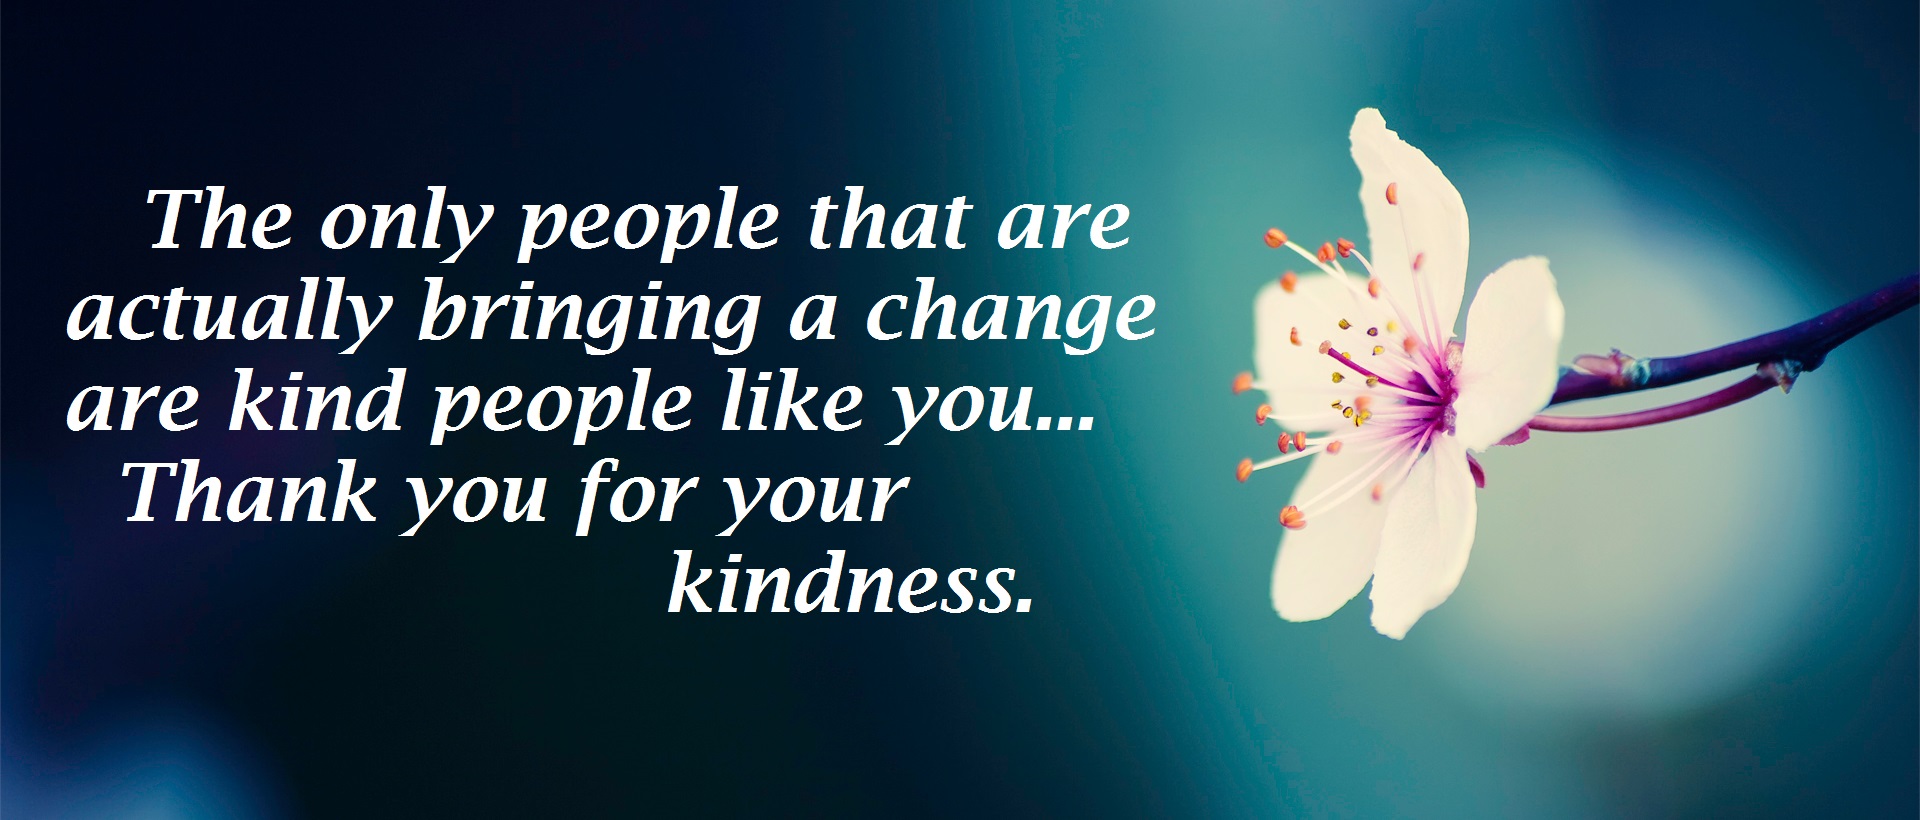 kindness quotes image